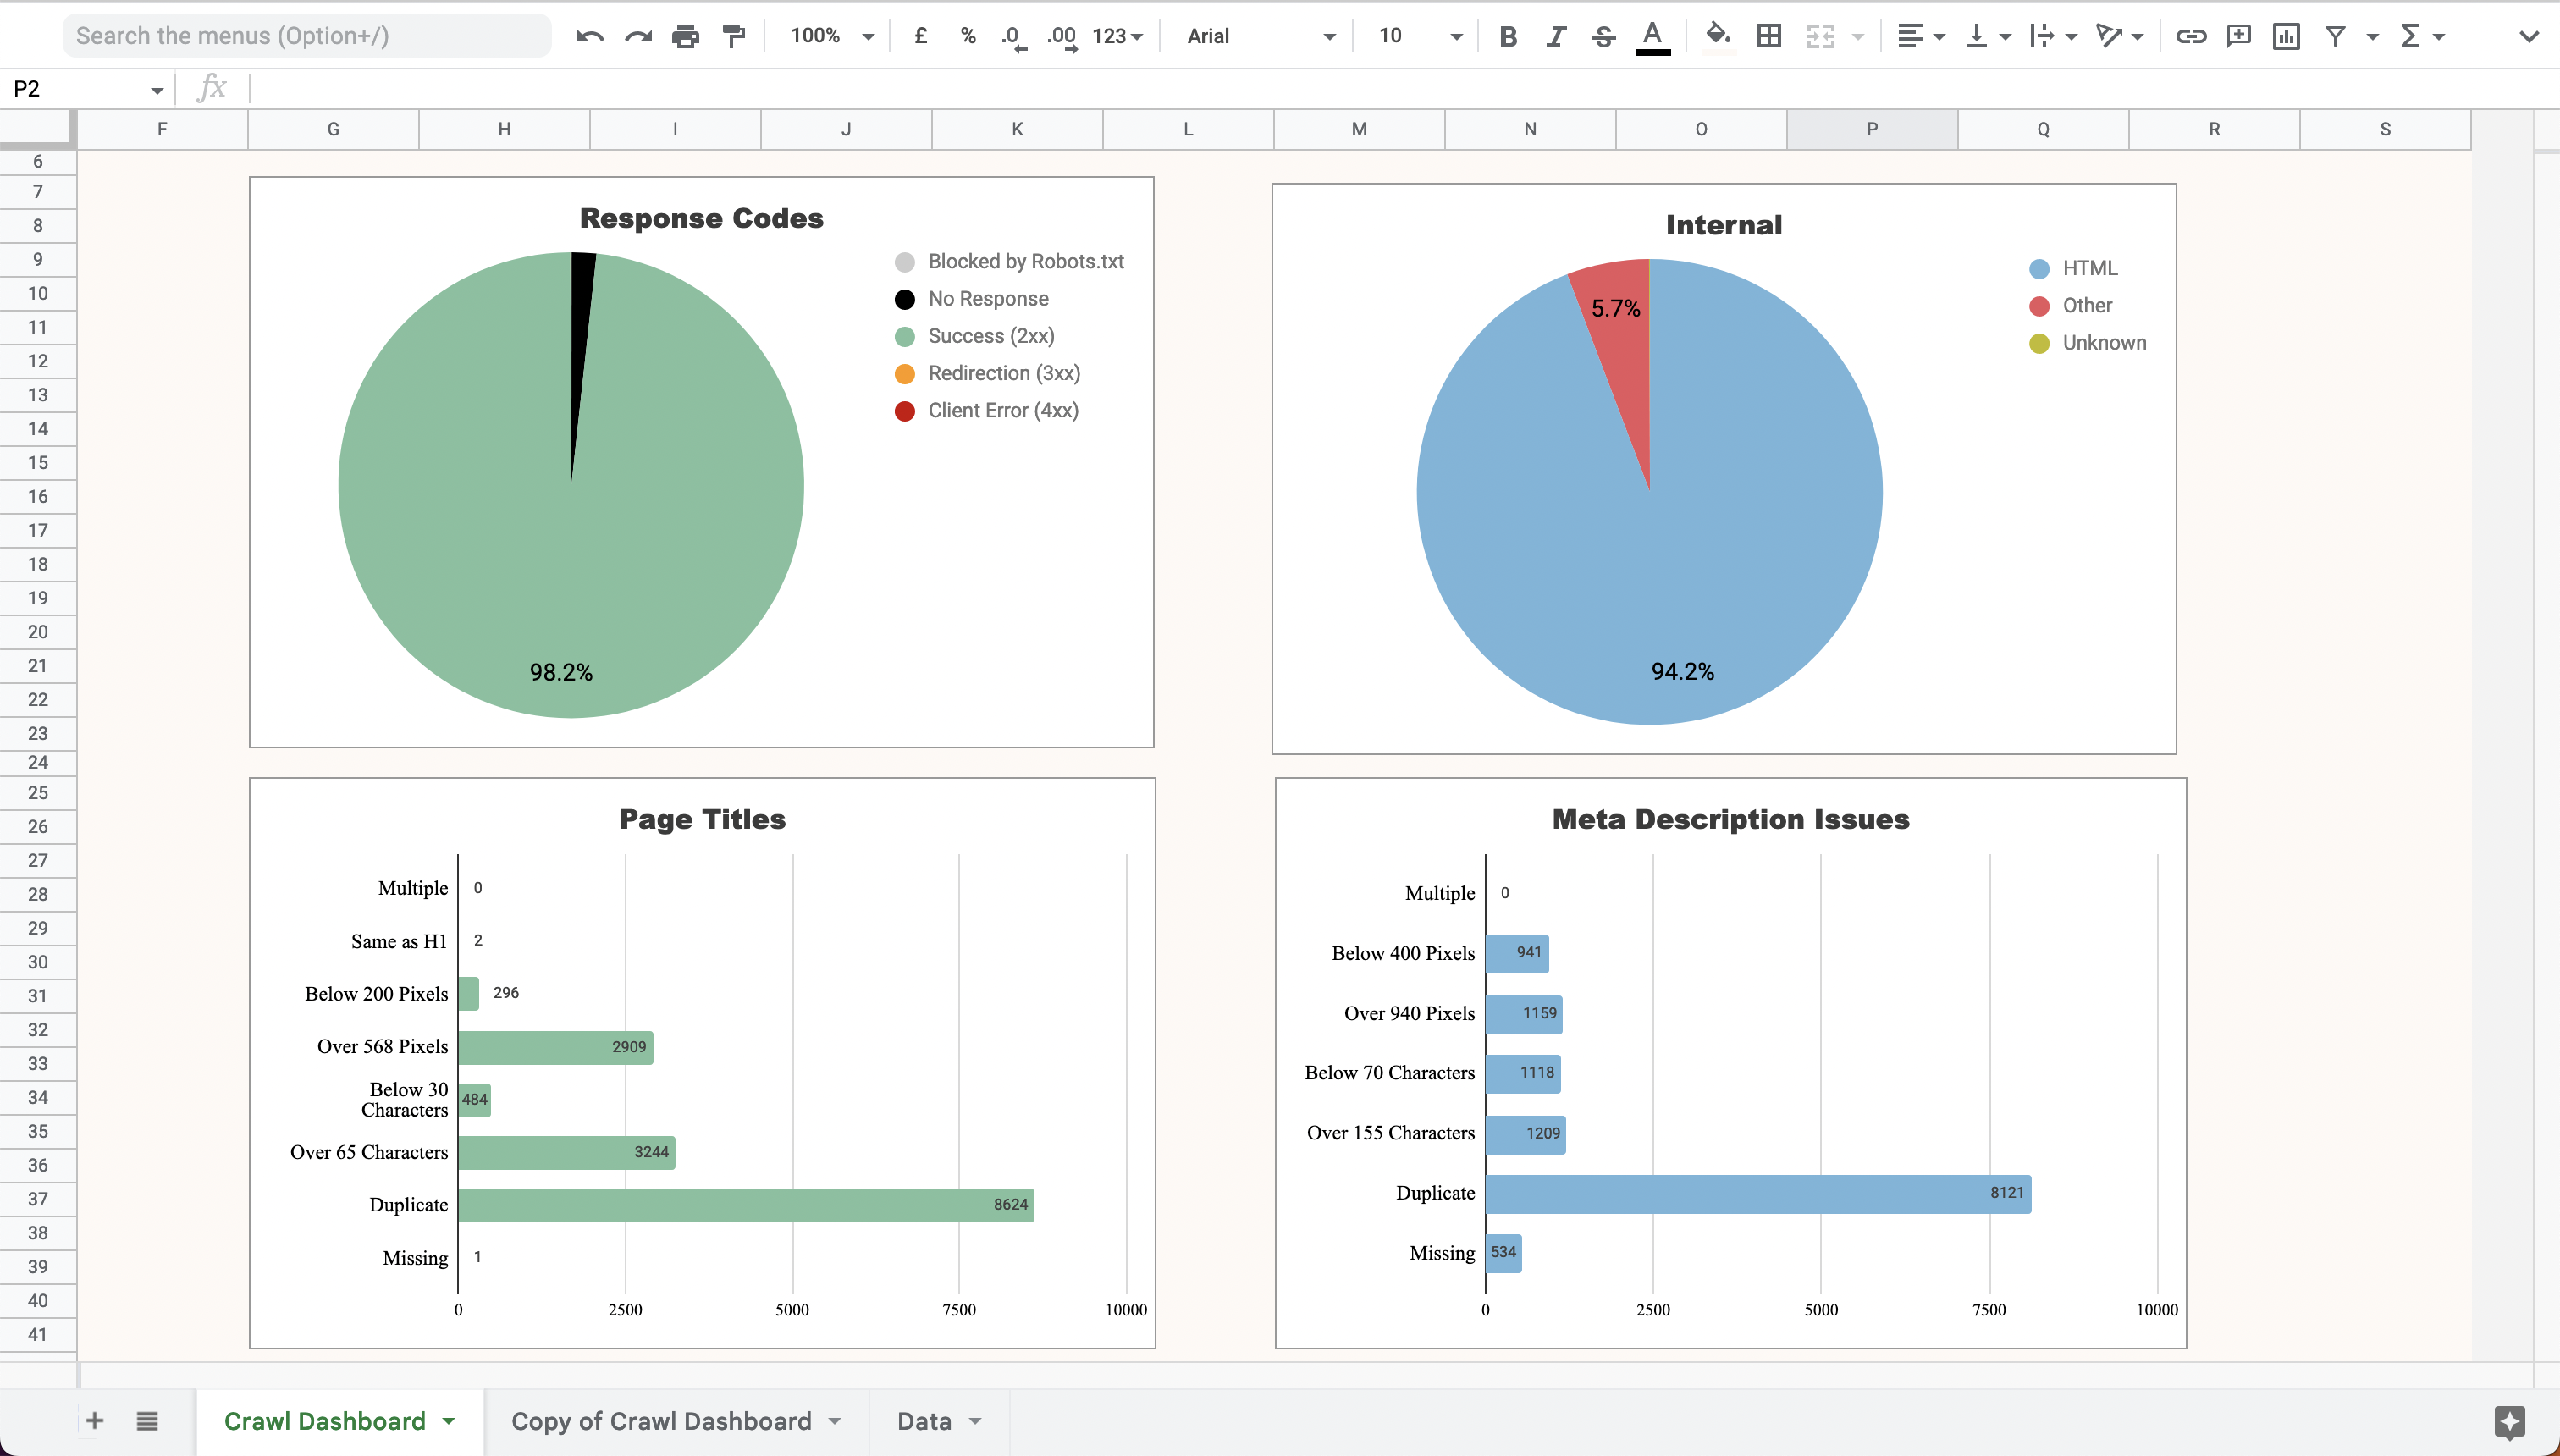 Example of simple visualizations you can make in Google Sheets